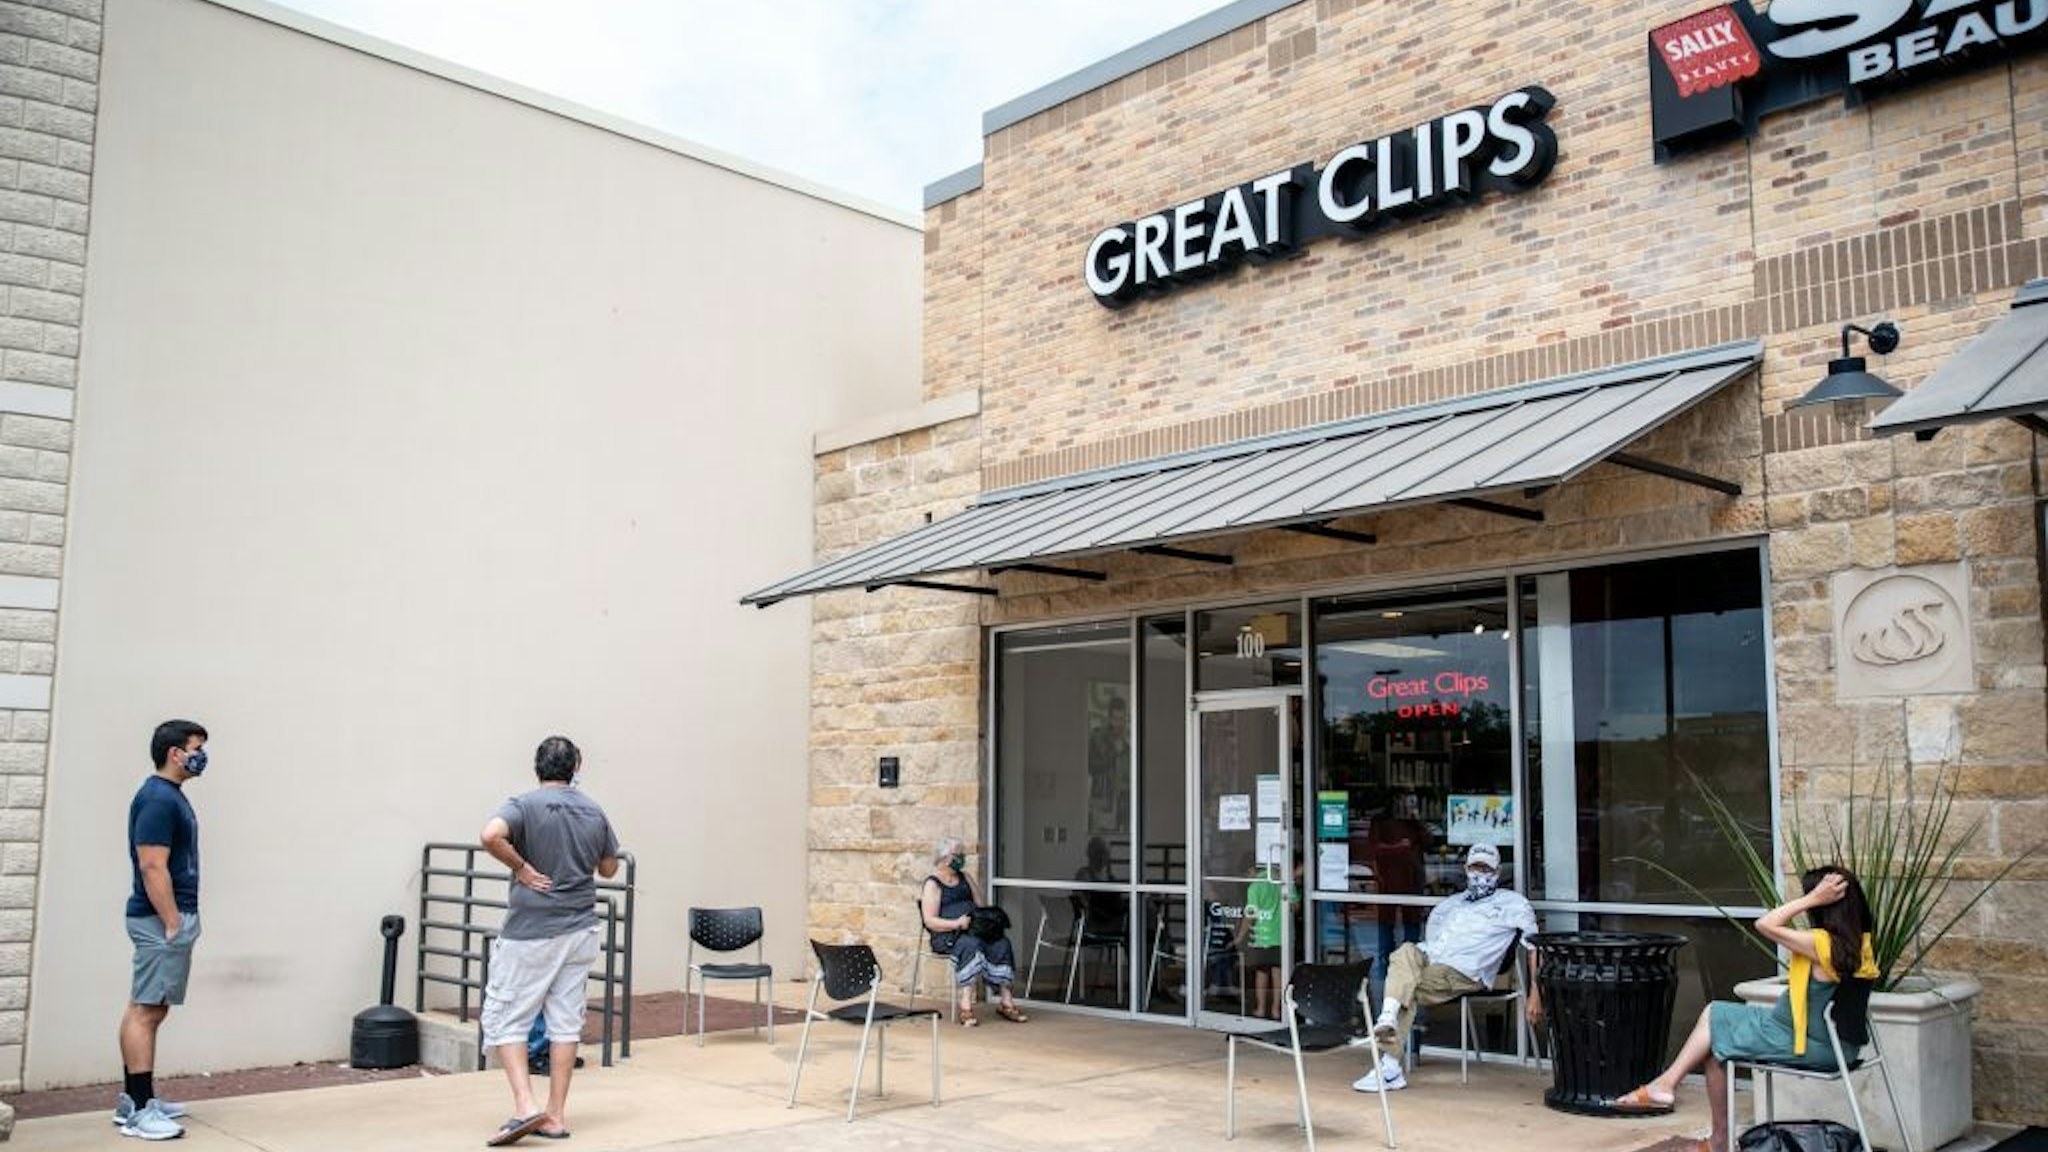 People wait for their haircuts outside Great Clips amid the coronavirus pandemic in Round Rock, Texas on May 8, 2020 following a slow reopening of the Texas economy. - A Texas hairdresser was sentenced to seven days in jail for keeping her salon open in violation of lockdown orders to slow the spread of the coronavirus, a move that state legislators decried on May 6, 2020 as "outrageous." (Photo by Sergio FLORES / AFP) (Photo by SERGIO FLORES/AFP via Getty Images)